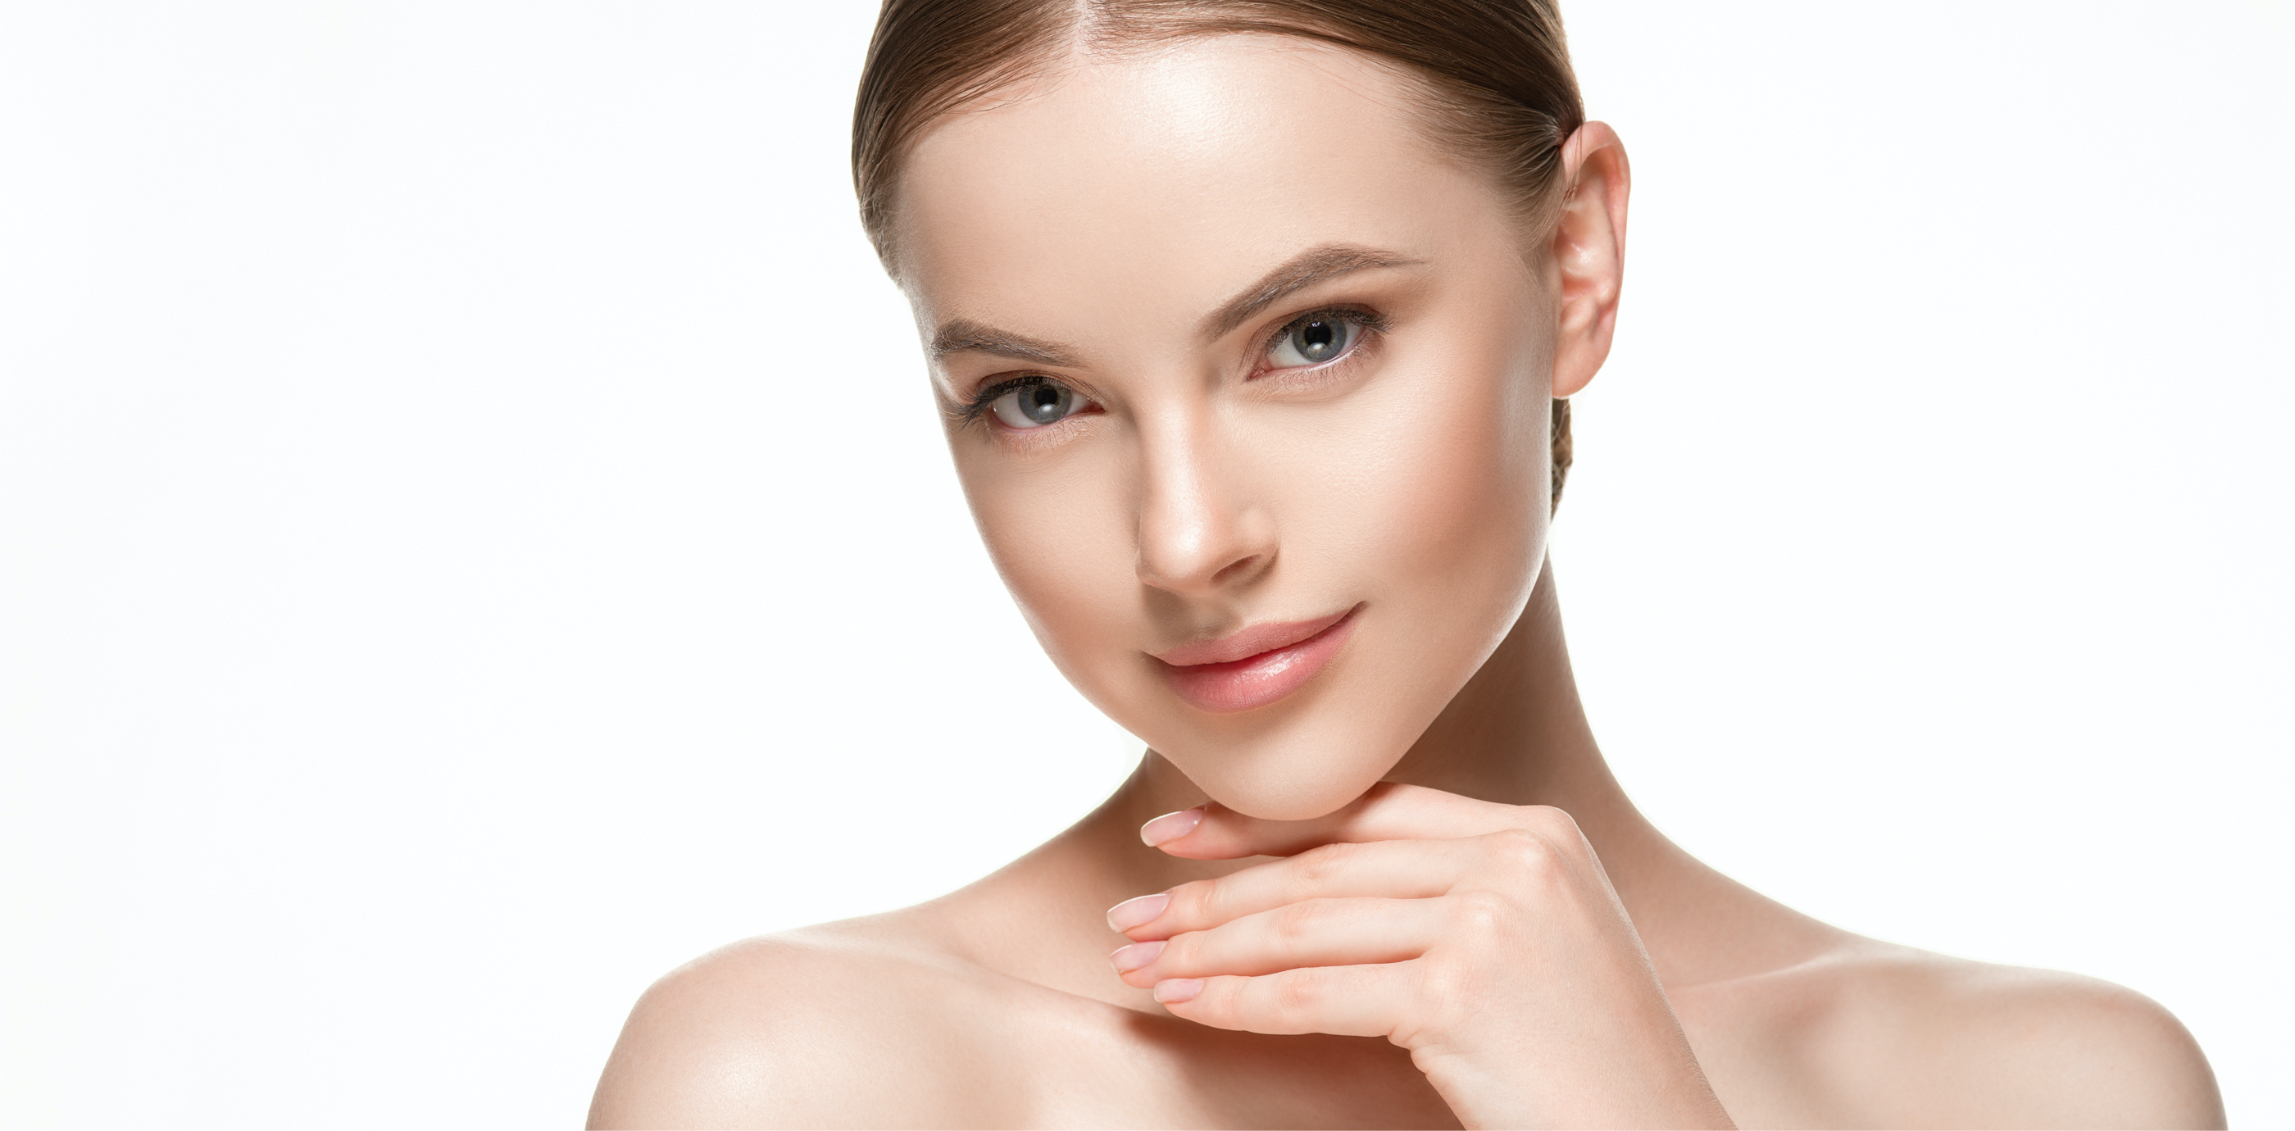 4 Benefits of Treating Your Skin with IPL Photofacials